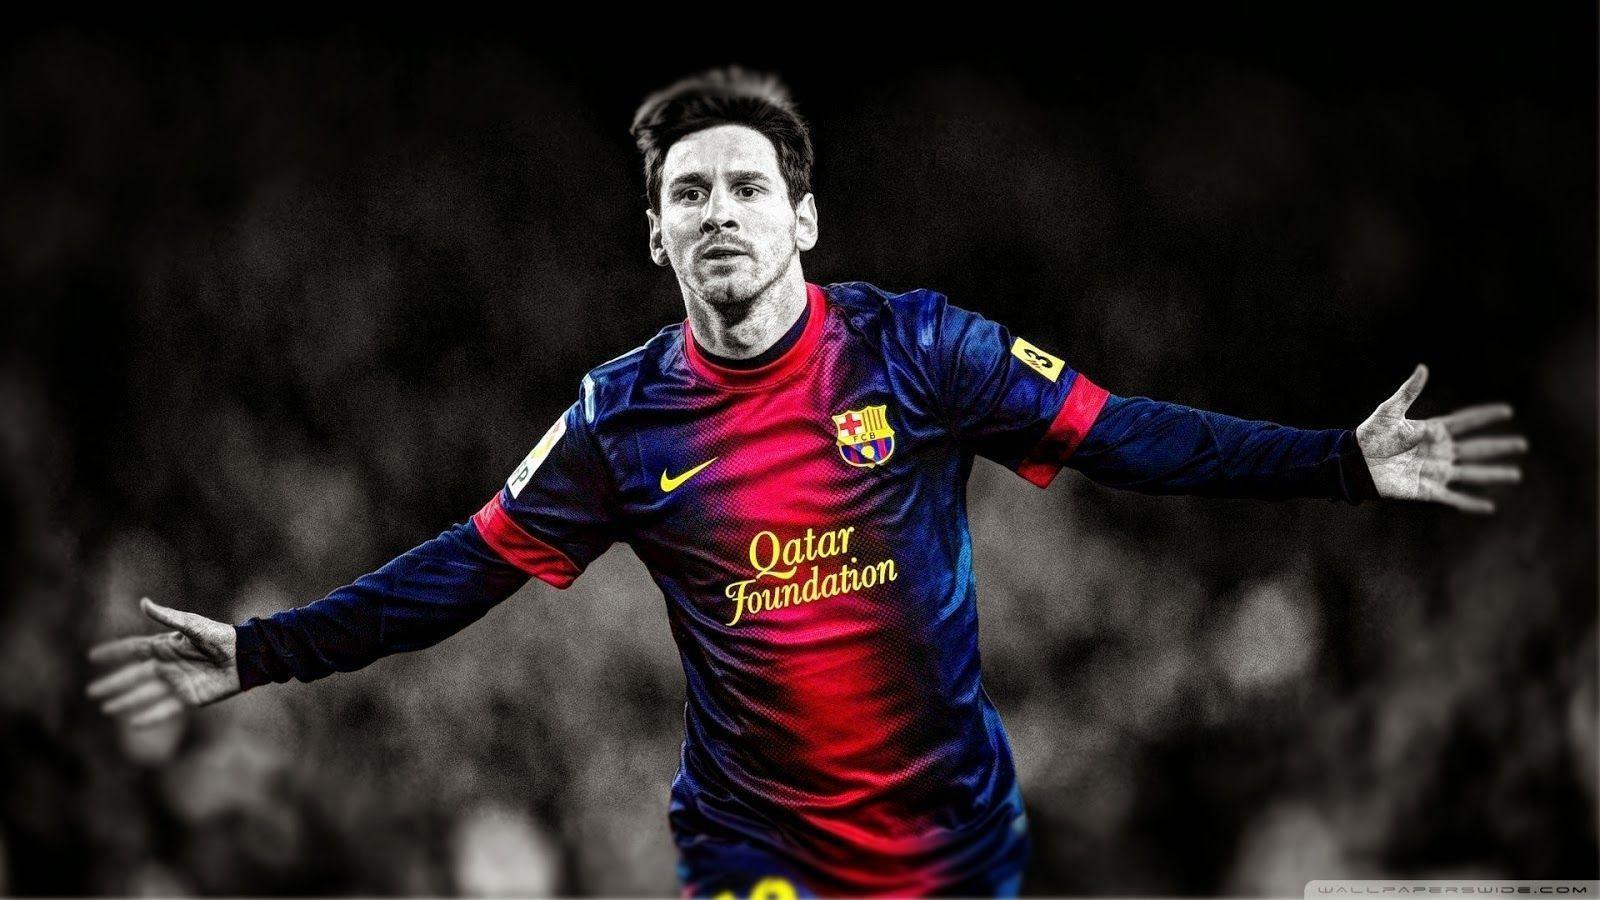 The best Messi wallpaper 2017 ideas. Messi 2017